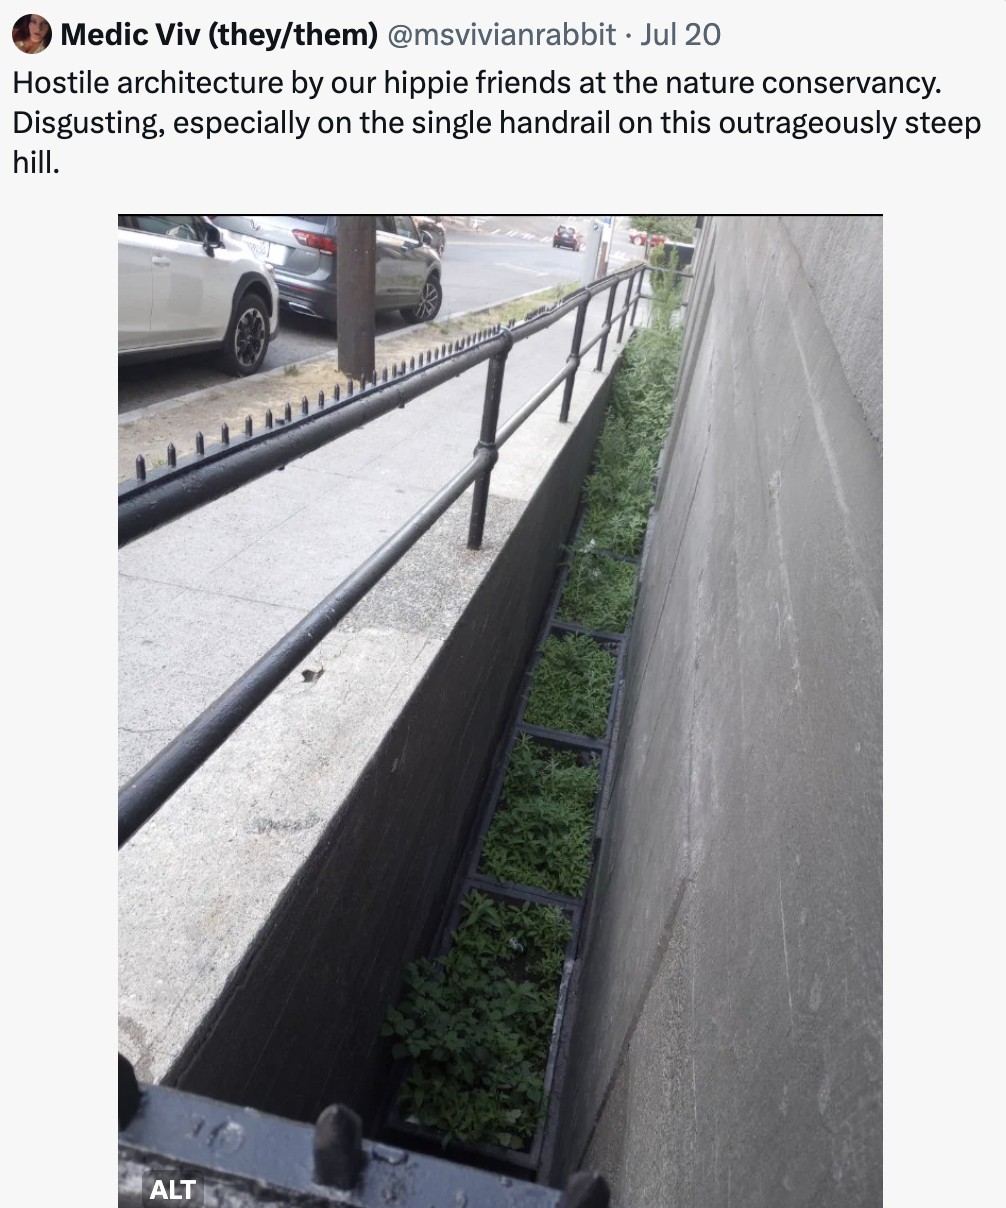 hostile design - guard rail - Medic Viv theythem . Jul 20 Hostile architecture by our hippie friends at the nature conservancy. Disgusting, especially on the single handrail on this outrageously steep hill. Alt